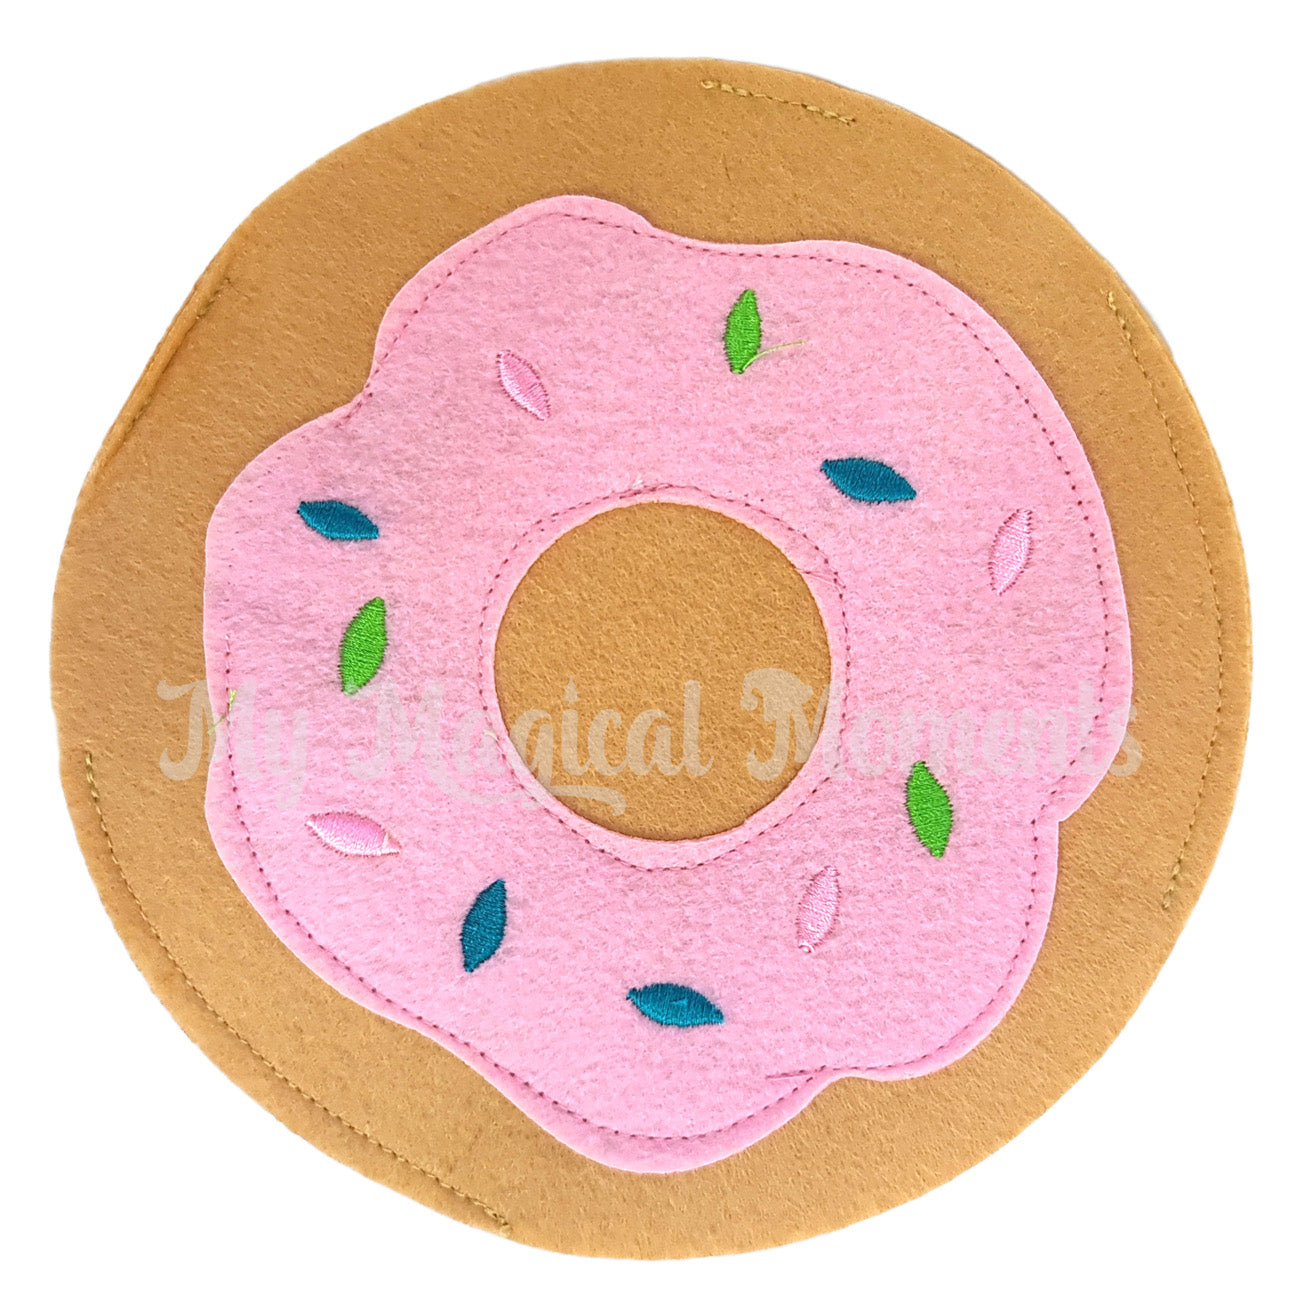 Elf strawberry donut costume with sprinkles